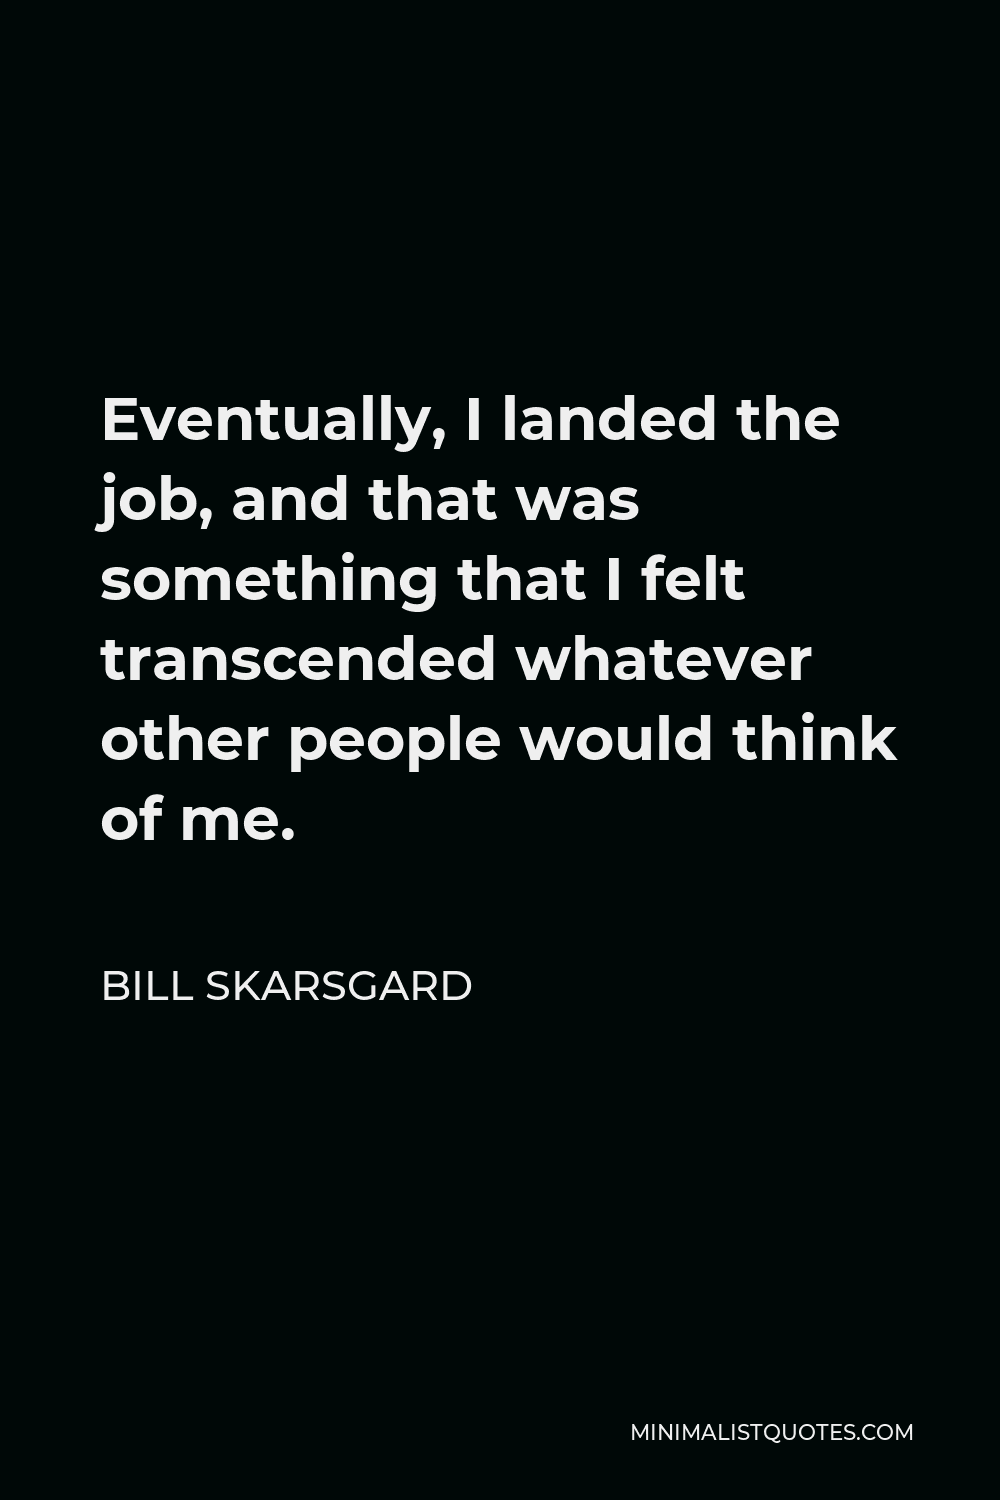 Bill Skarsgard Quote - Eventually, I landed the job, and that was something that I felt transcended whatever other people would think of me.